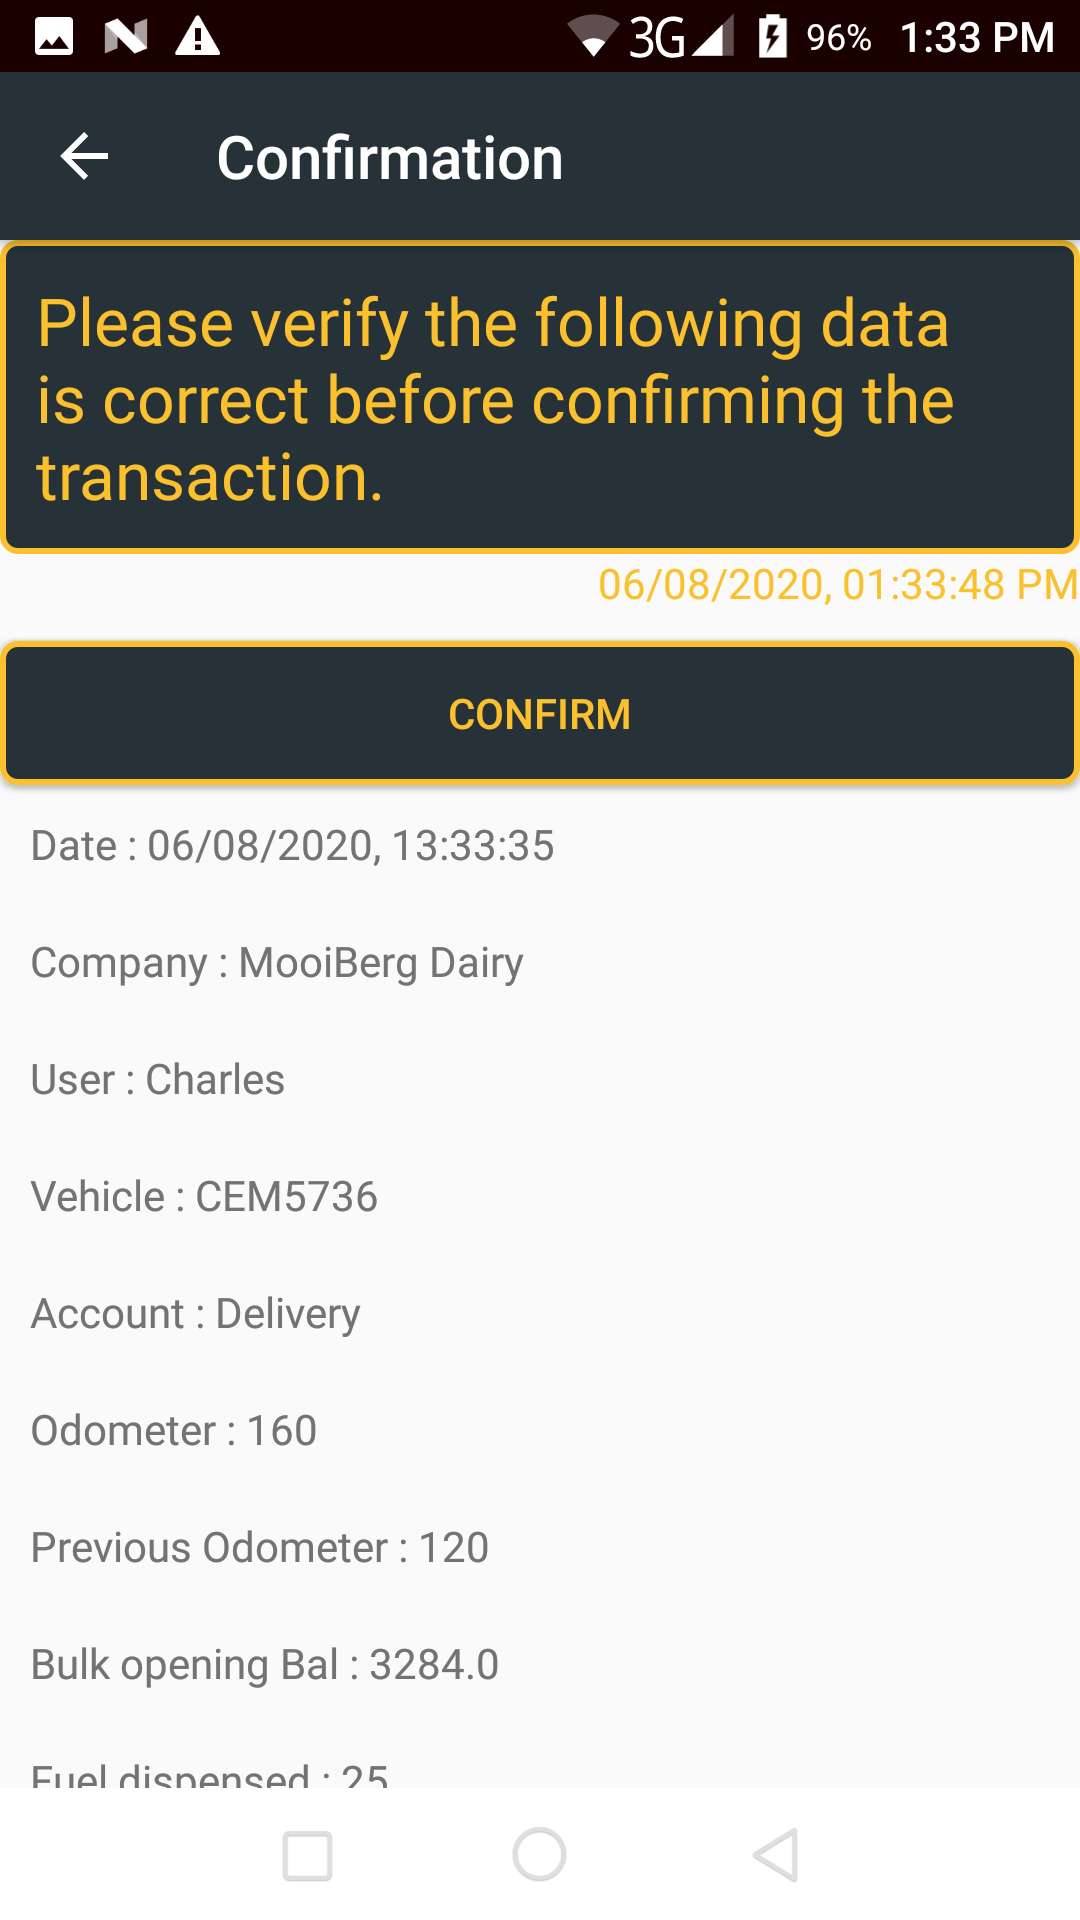 Liquitrack Fuel Record App, showing a transaction being confirmed.